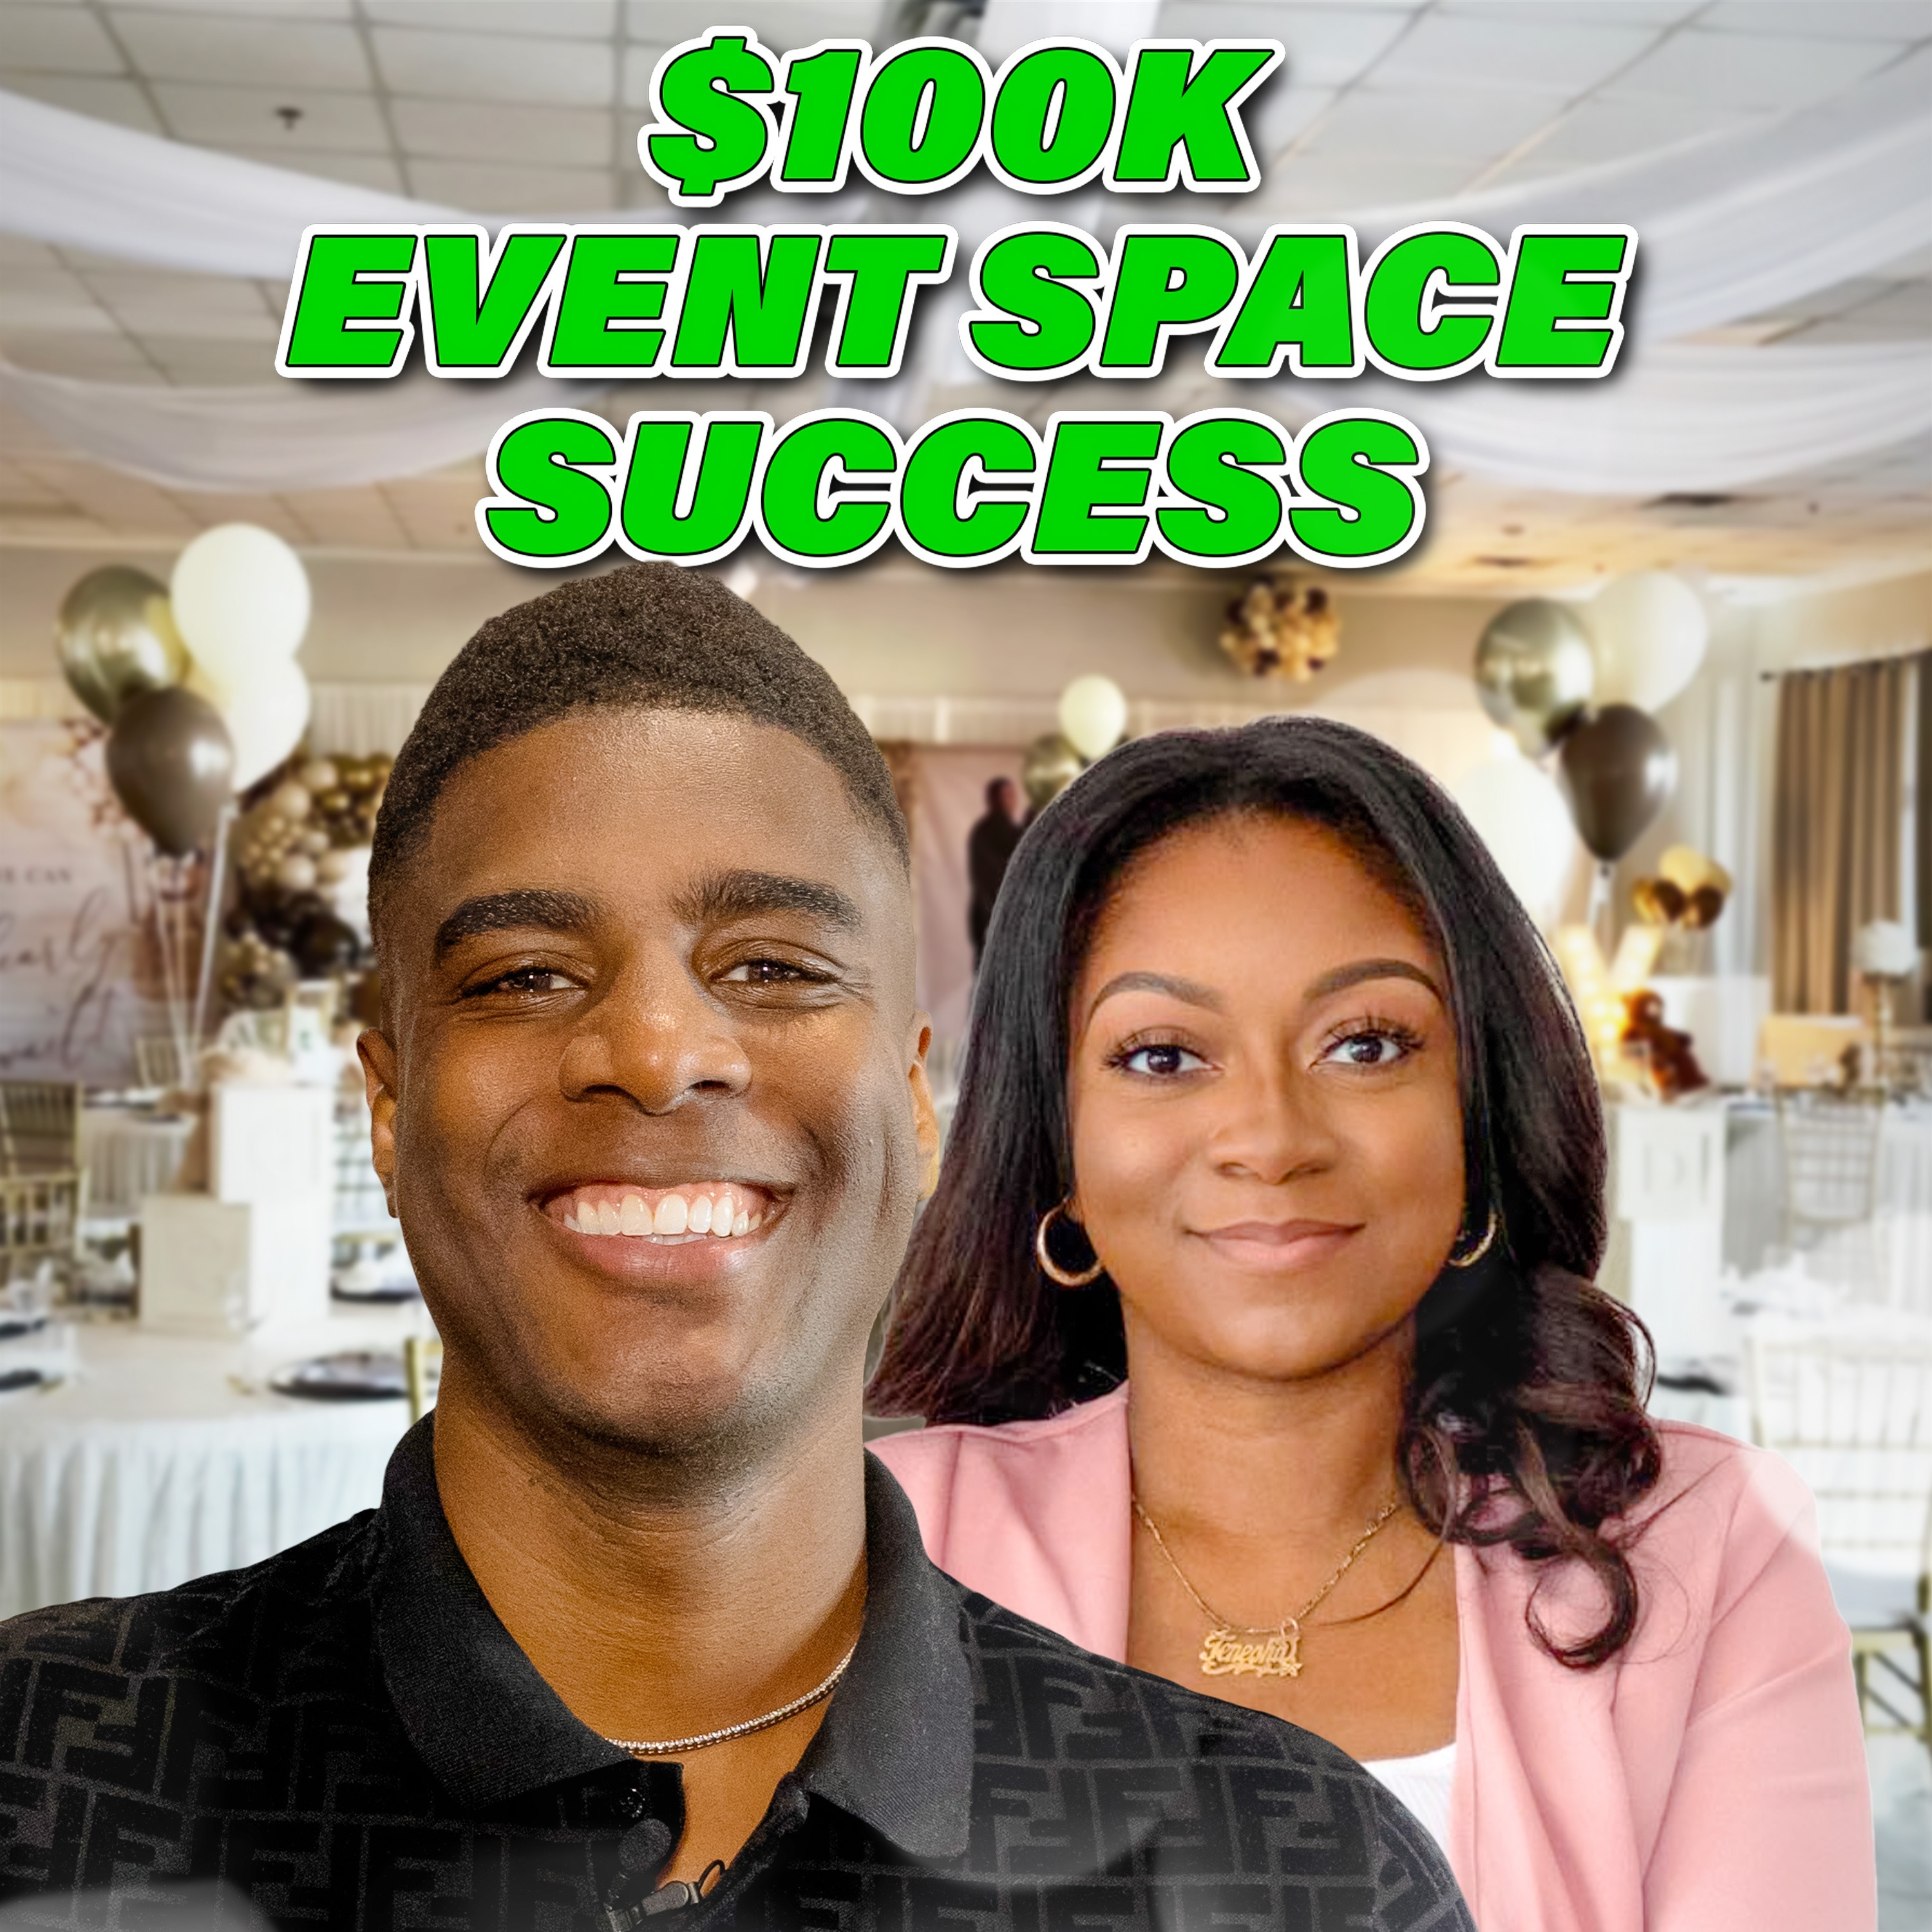 From Nothing to $100k: Tenesha Madison’s Journey to Building a Million-Dollar Event Space Business